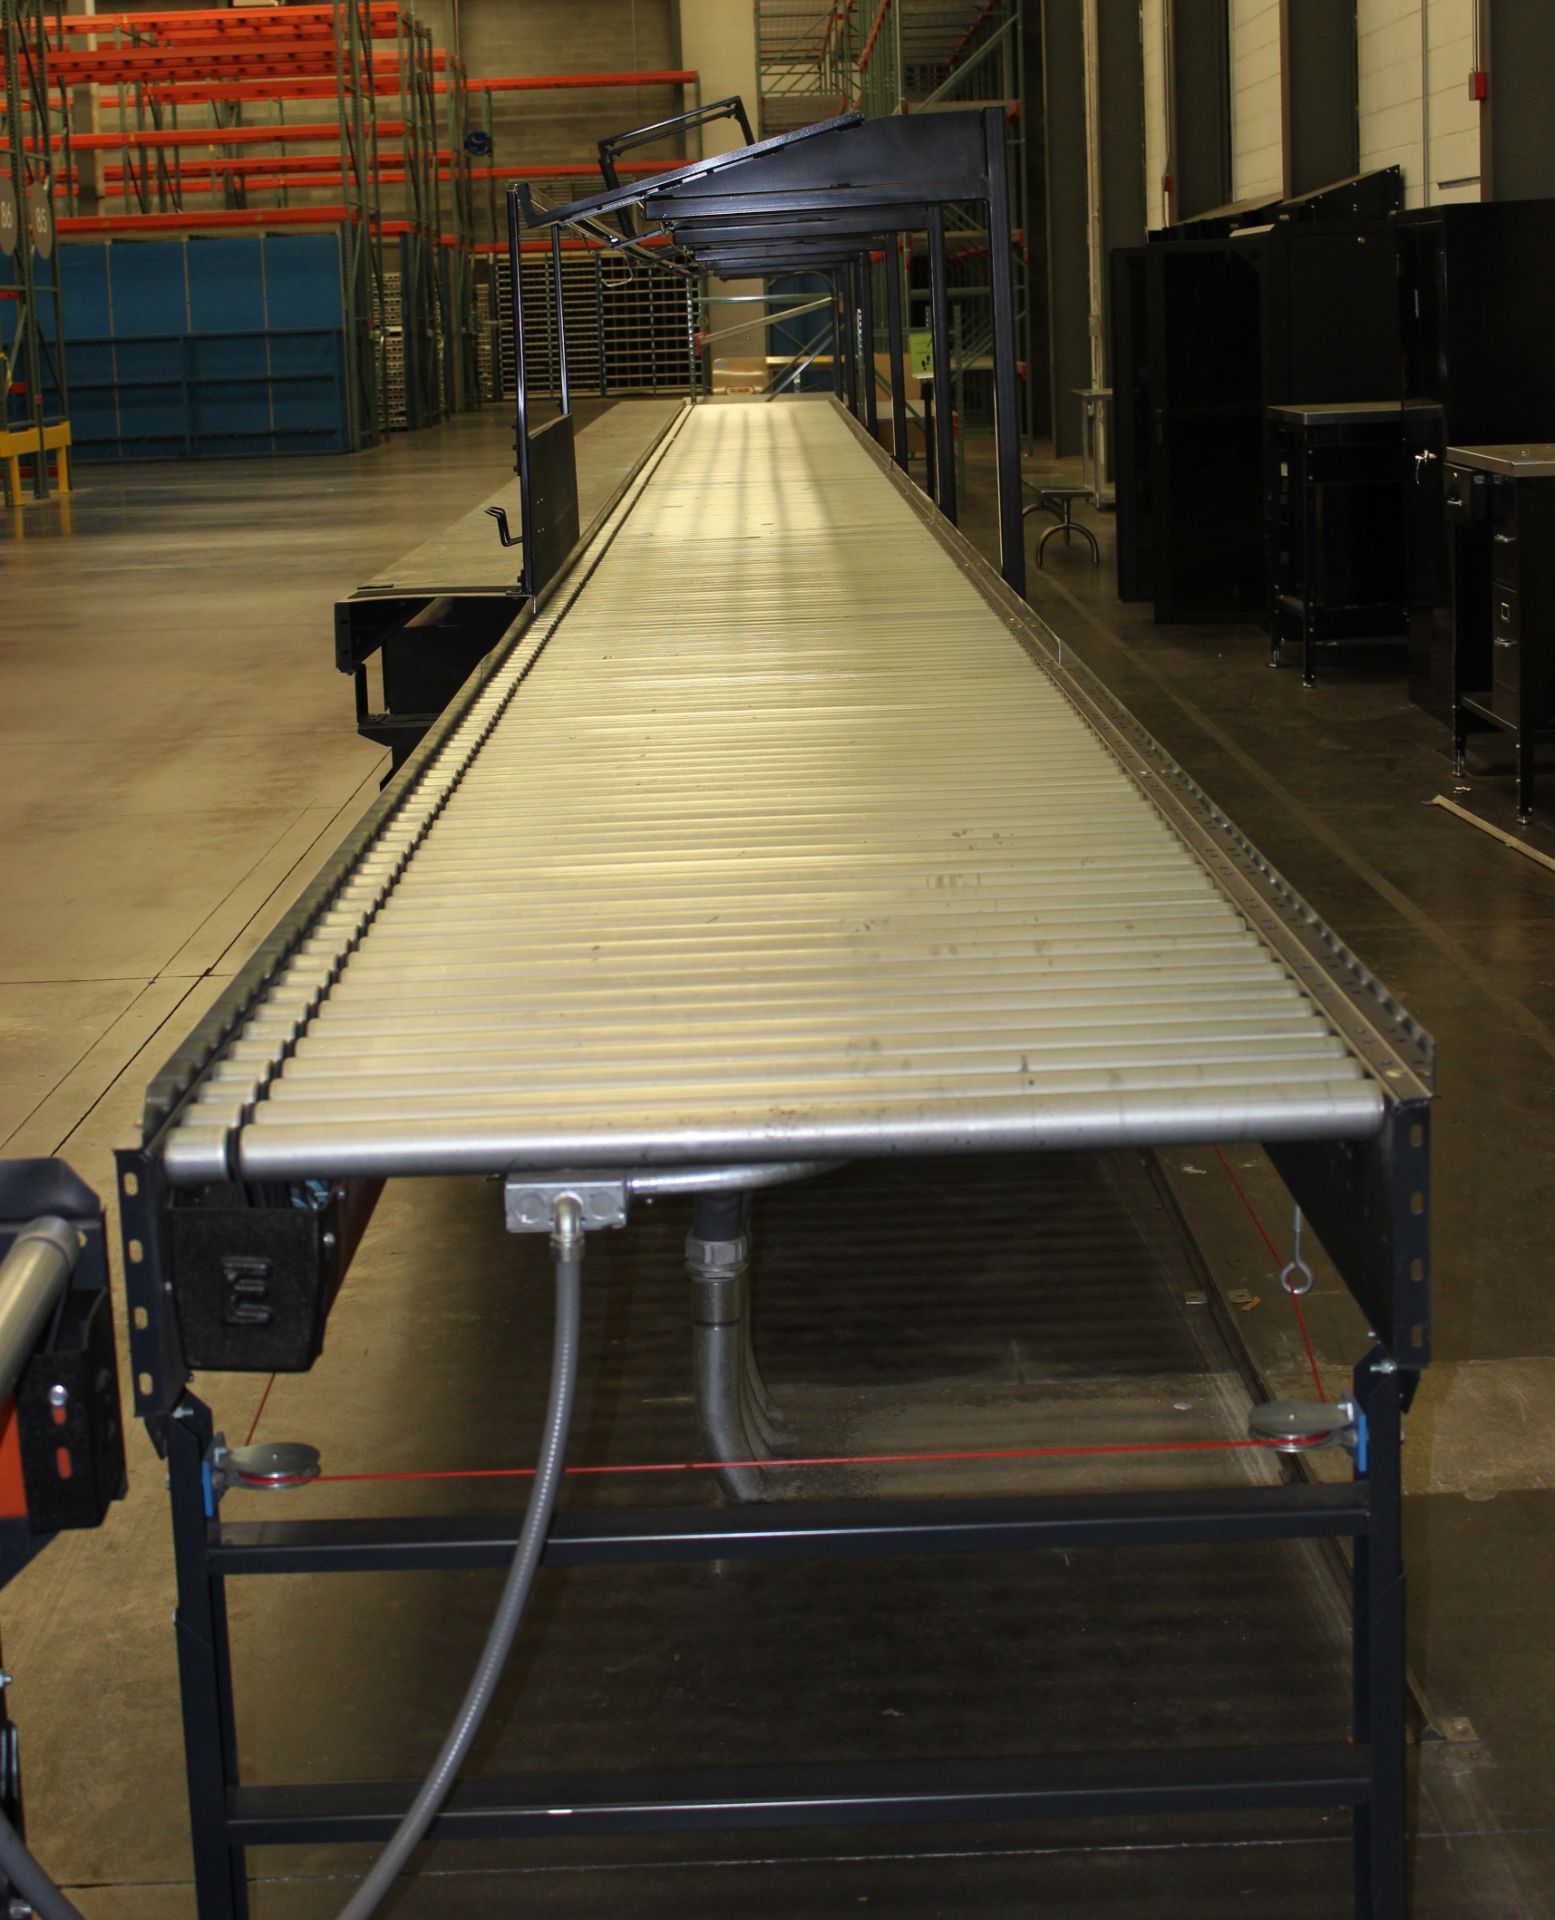 2008 XENOROL XR48, 62 FT LONG X 42" WIDE, LINE-SHAFT-DRIVEN LIVE ROLLER CONVEYOR / POWERED CONVEYOR, - Image 5 of 5